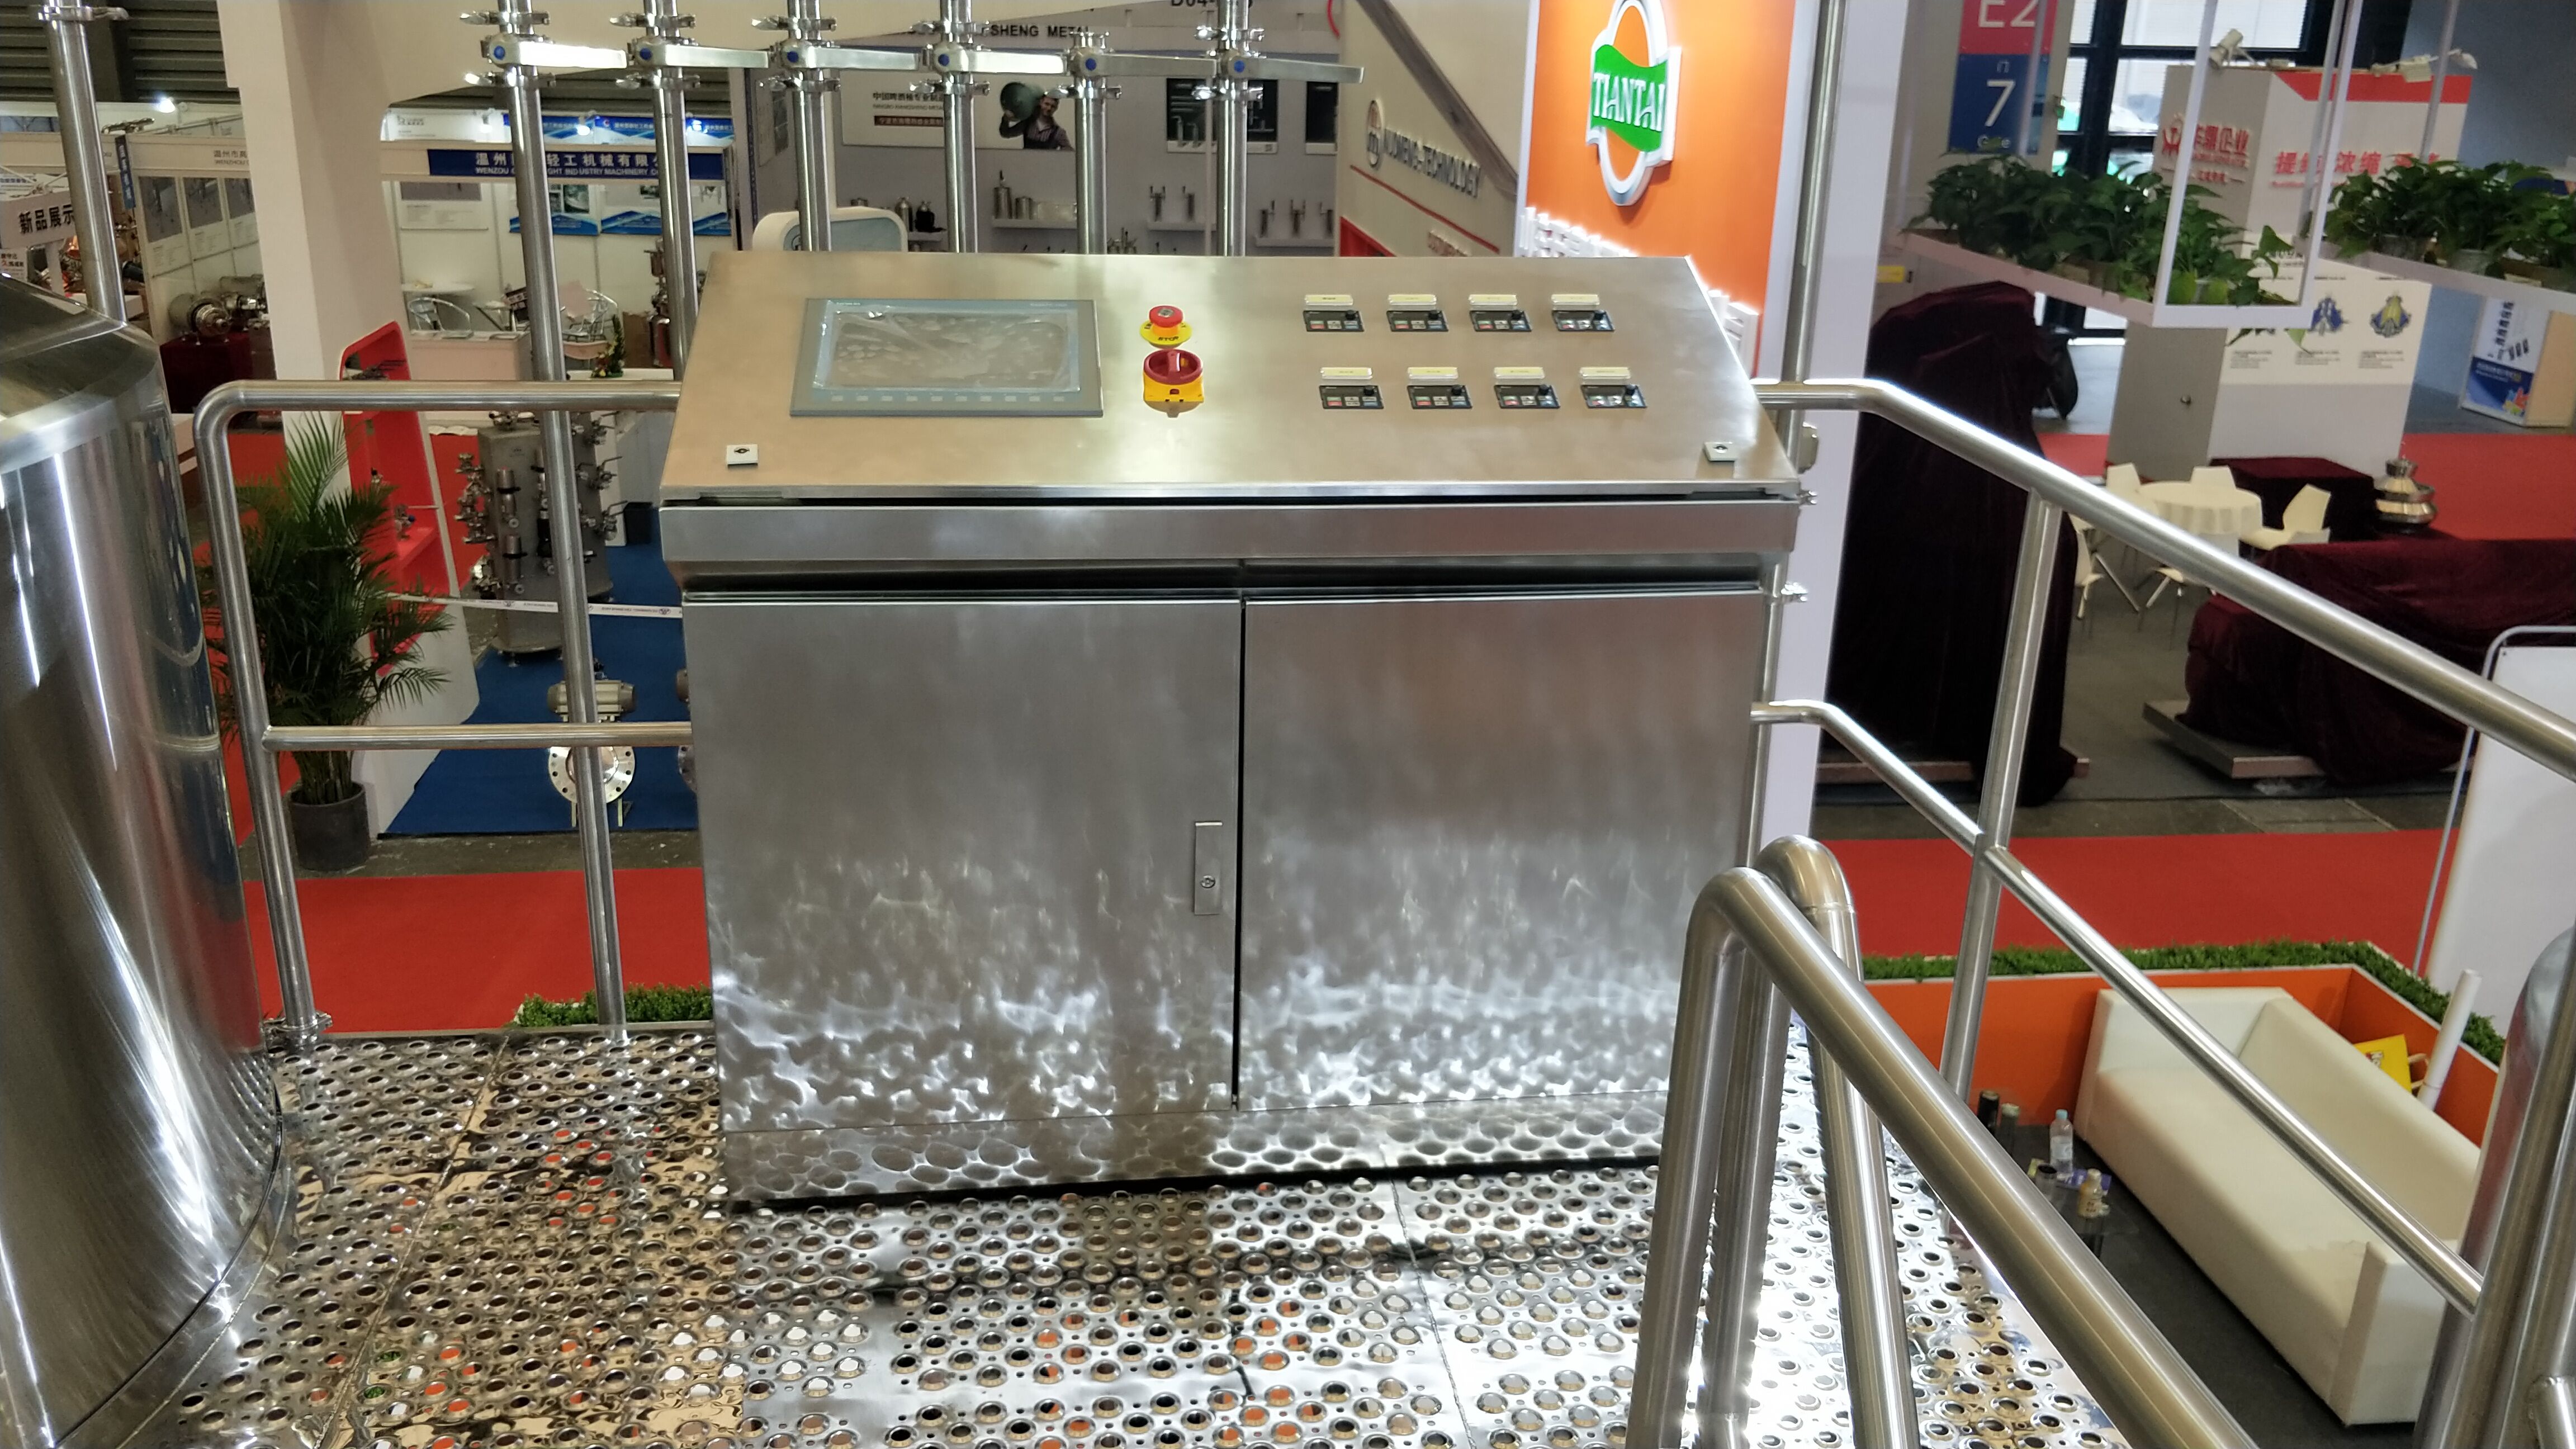 Tiantai Brewery Control Cabinet System